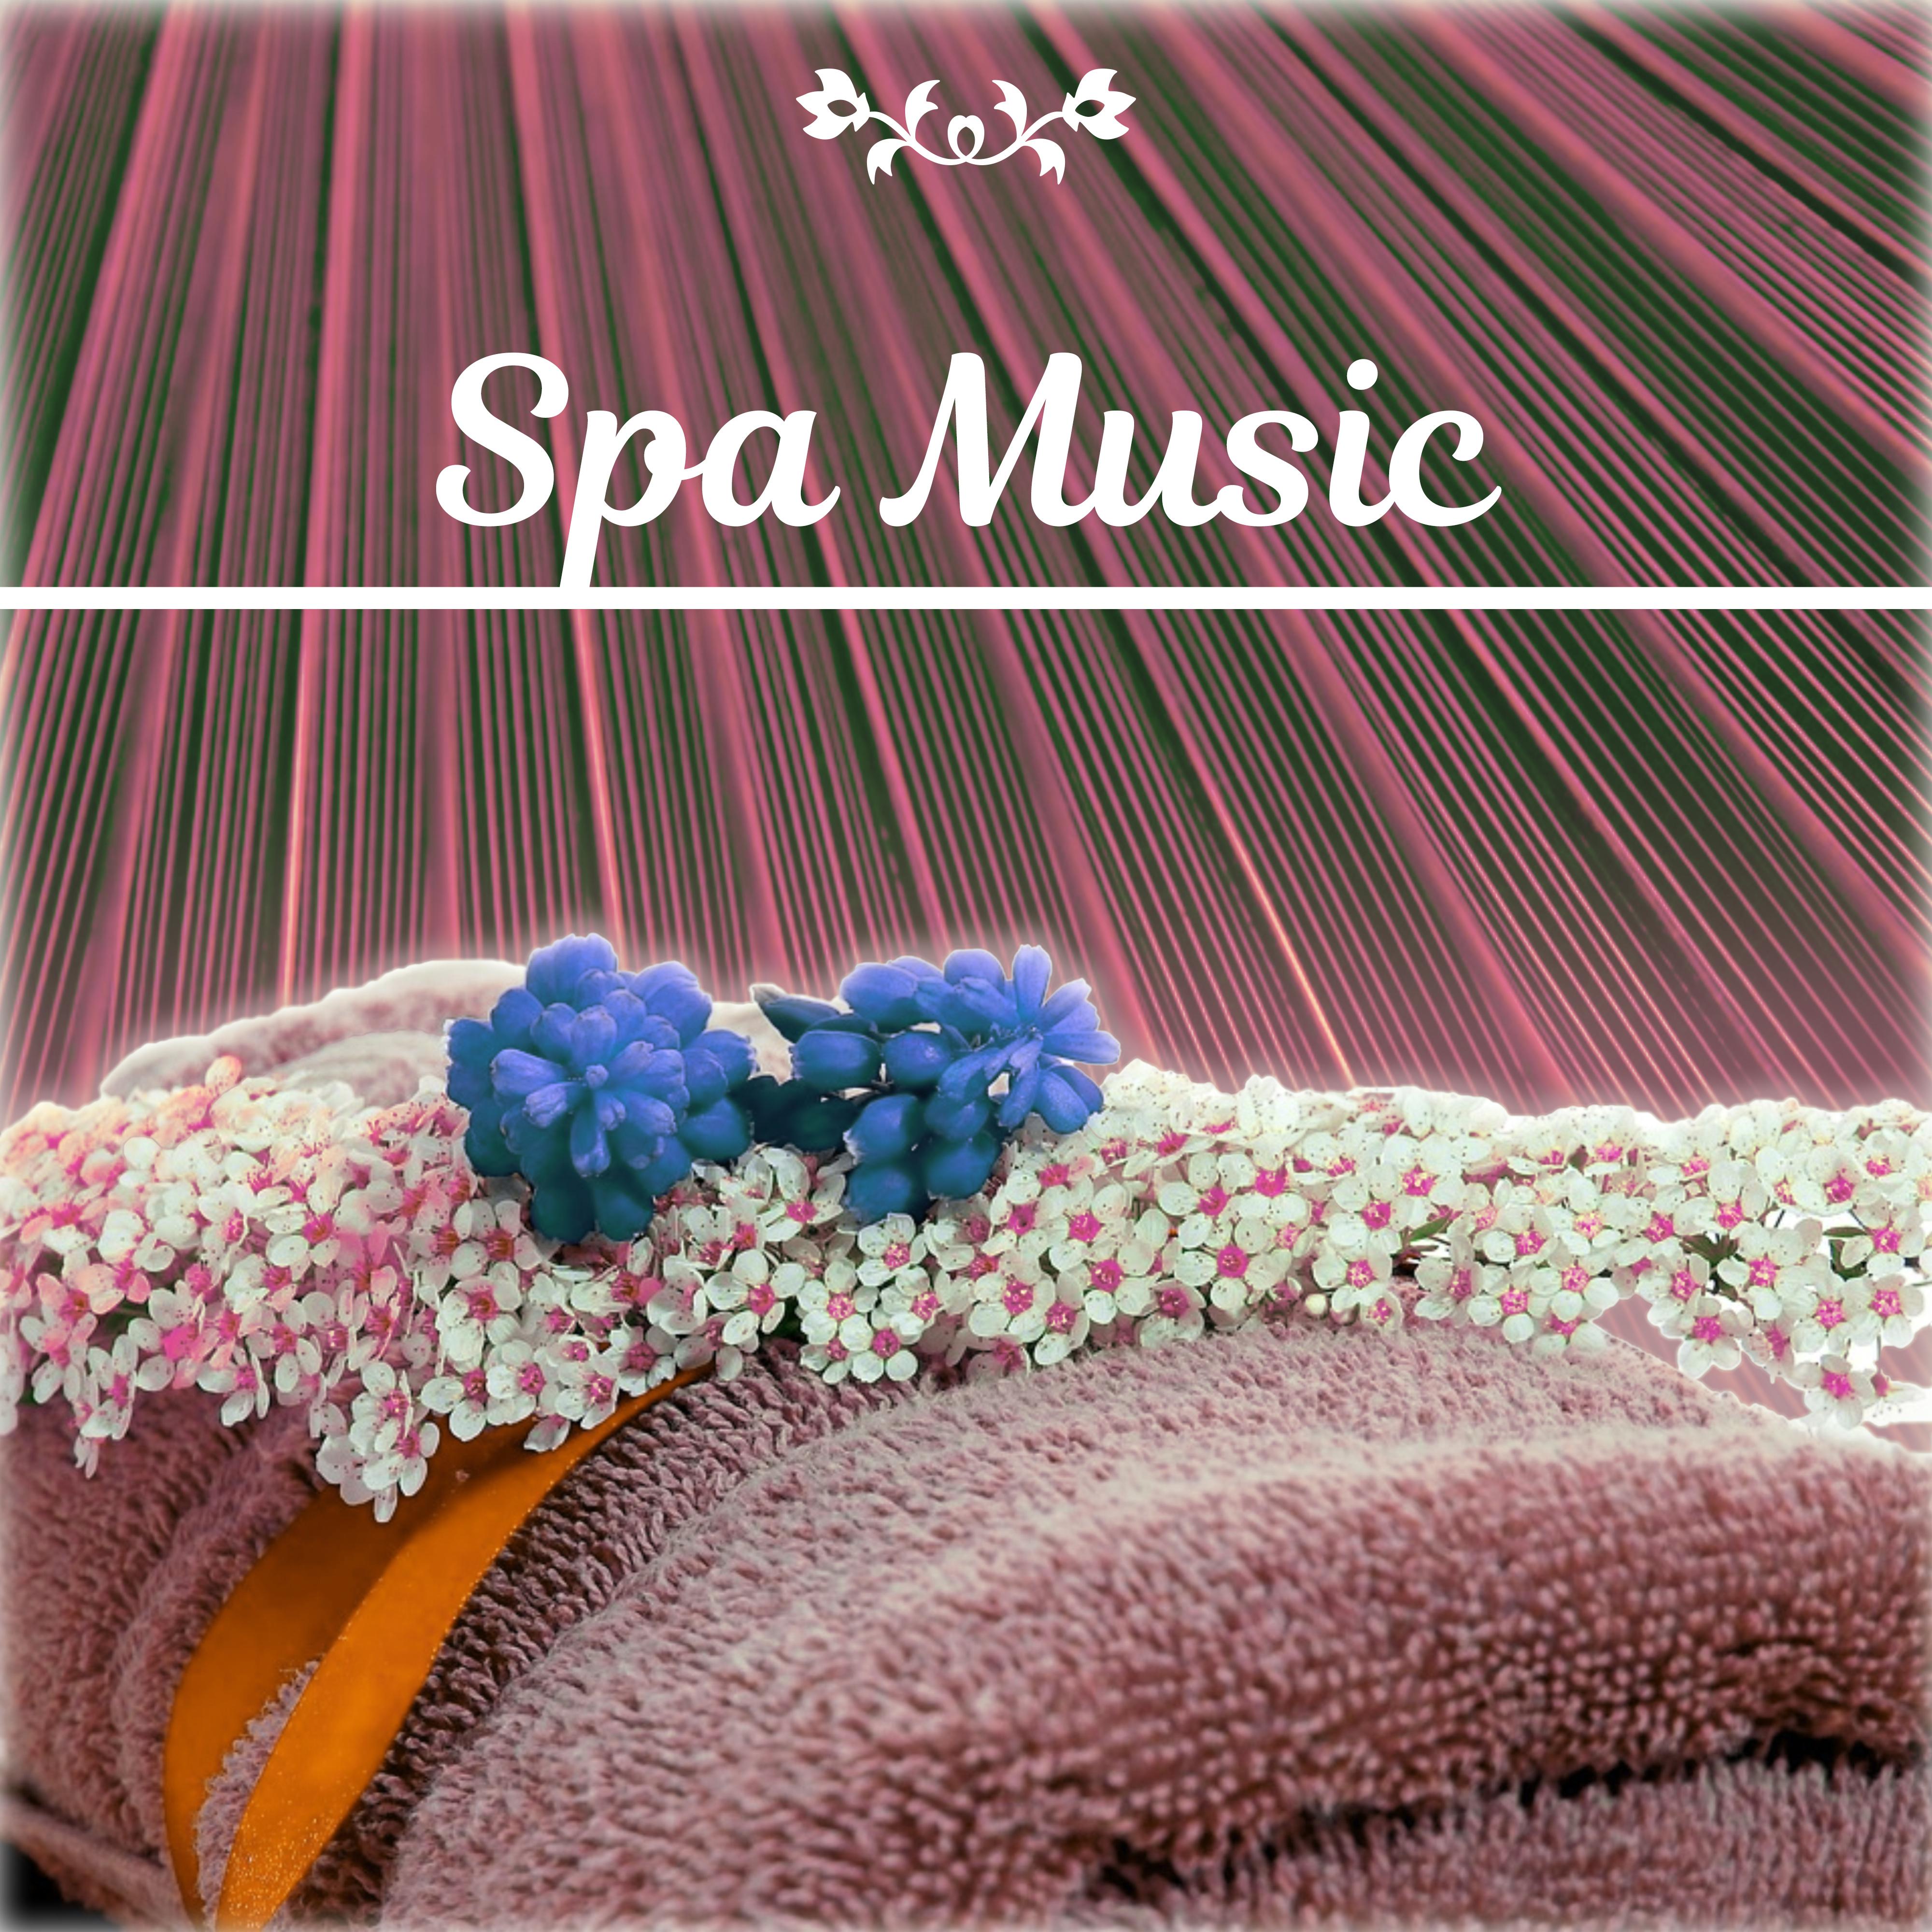 Spa Music – Relaxation Sounds for Massage, Spa, Wellness, Tantric Sleep, Peaceful Mind